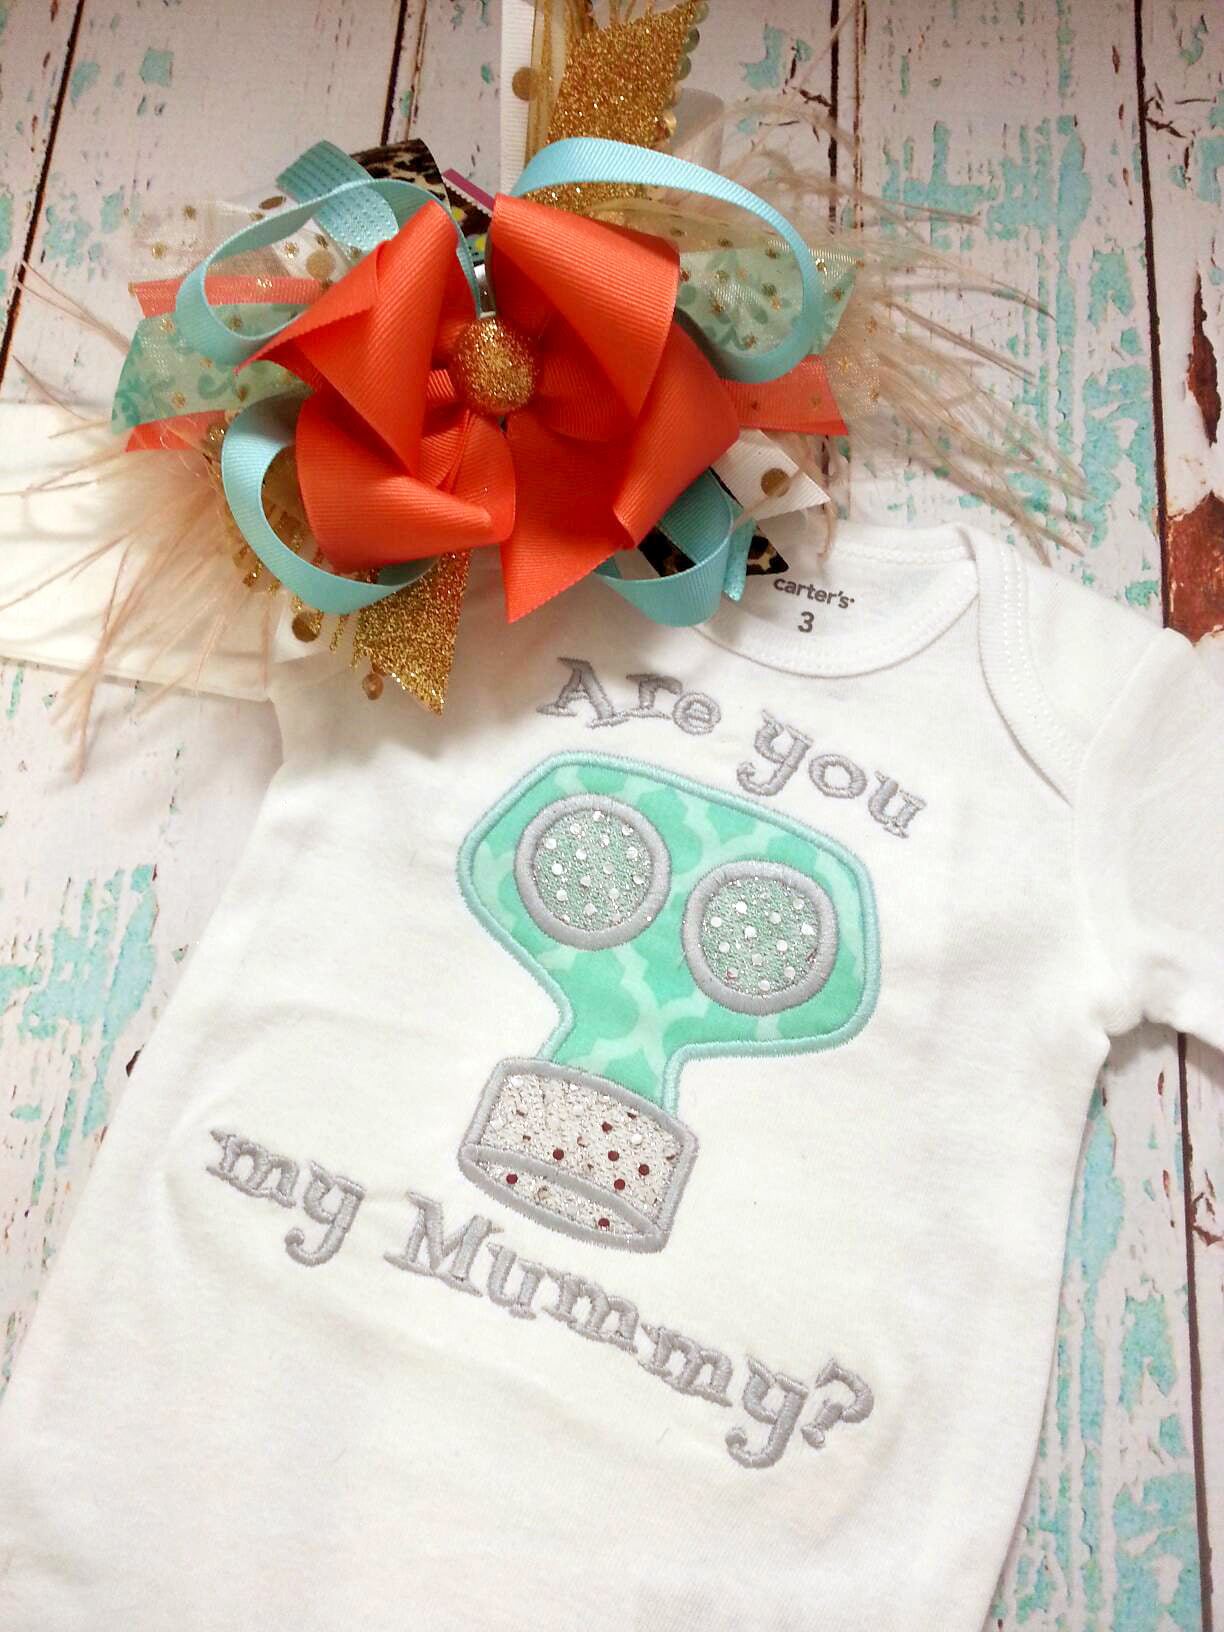 A white baby sleeper sits on a weathered painted wood background. Above the sleeper is a gold, coral, and aqua bow. The shirt is embroidered with the phrase "Are you my Mummy?" and a gas mask done in aqua quatrefoil and silver fabric.